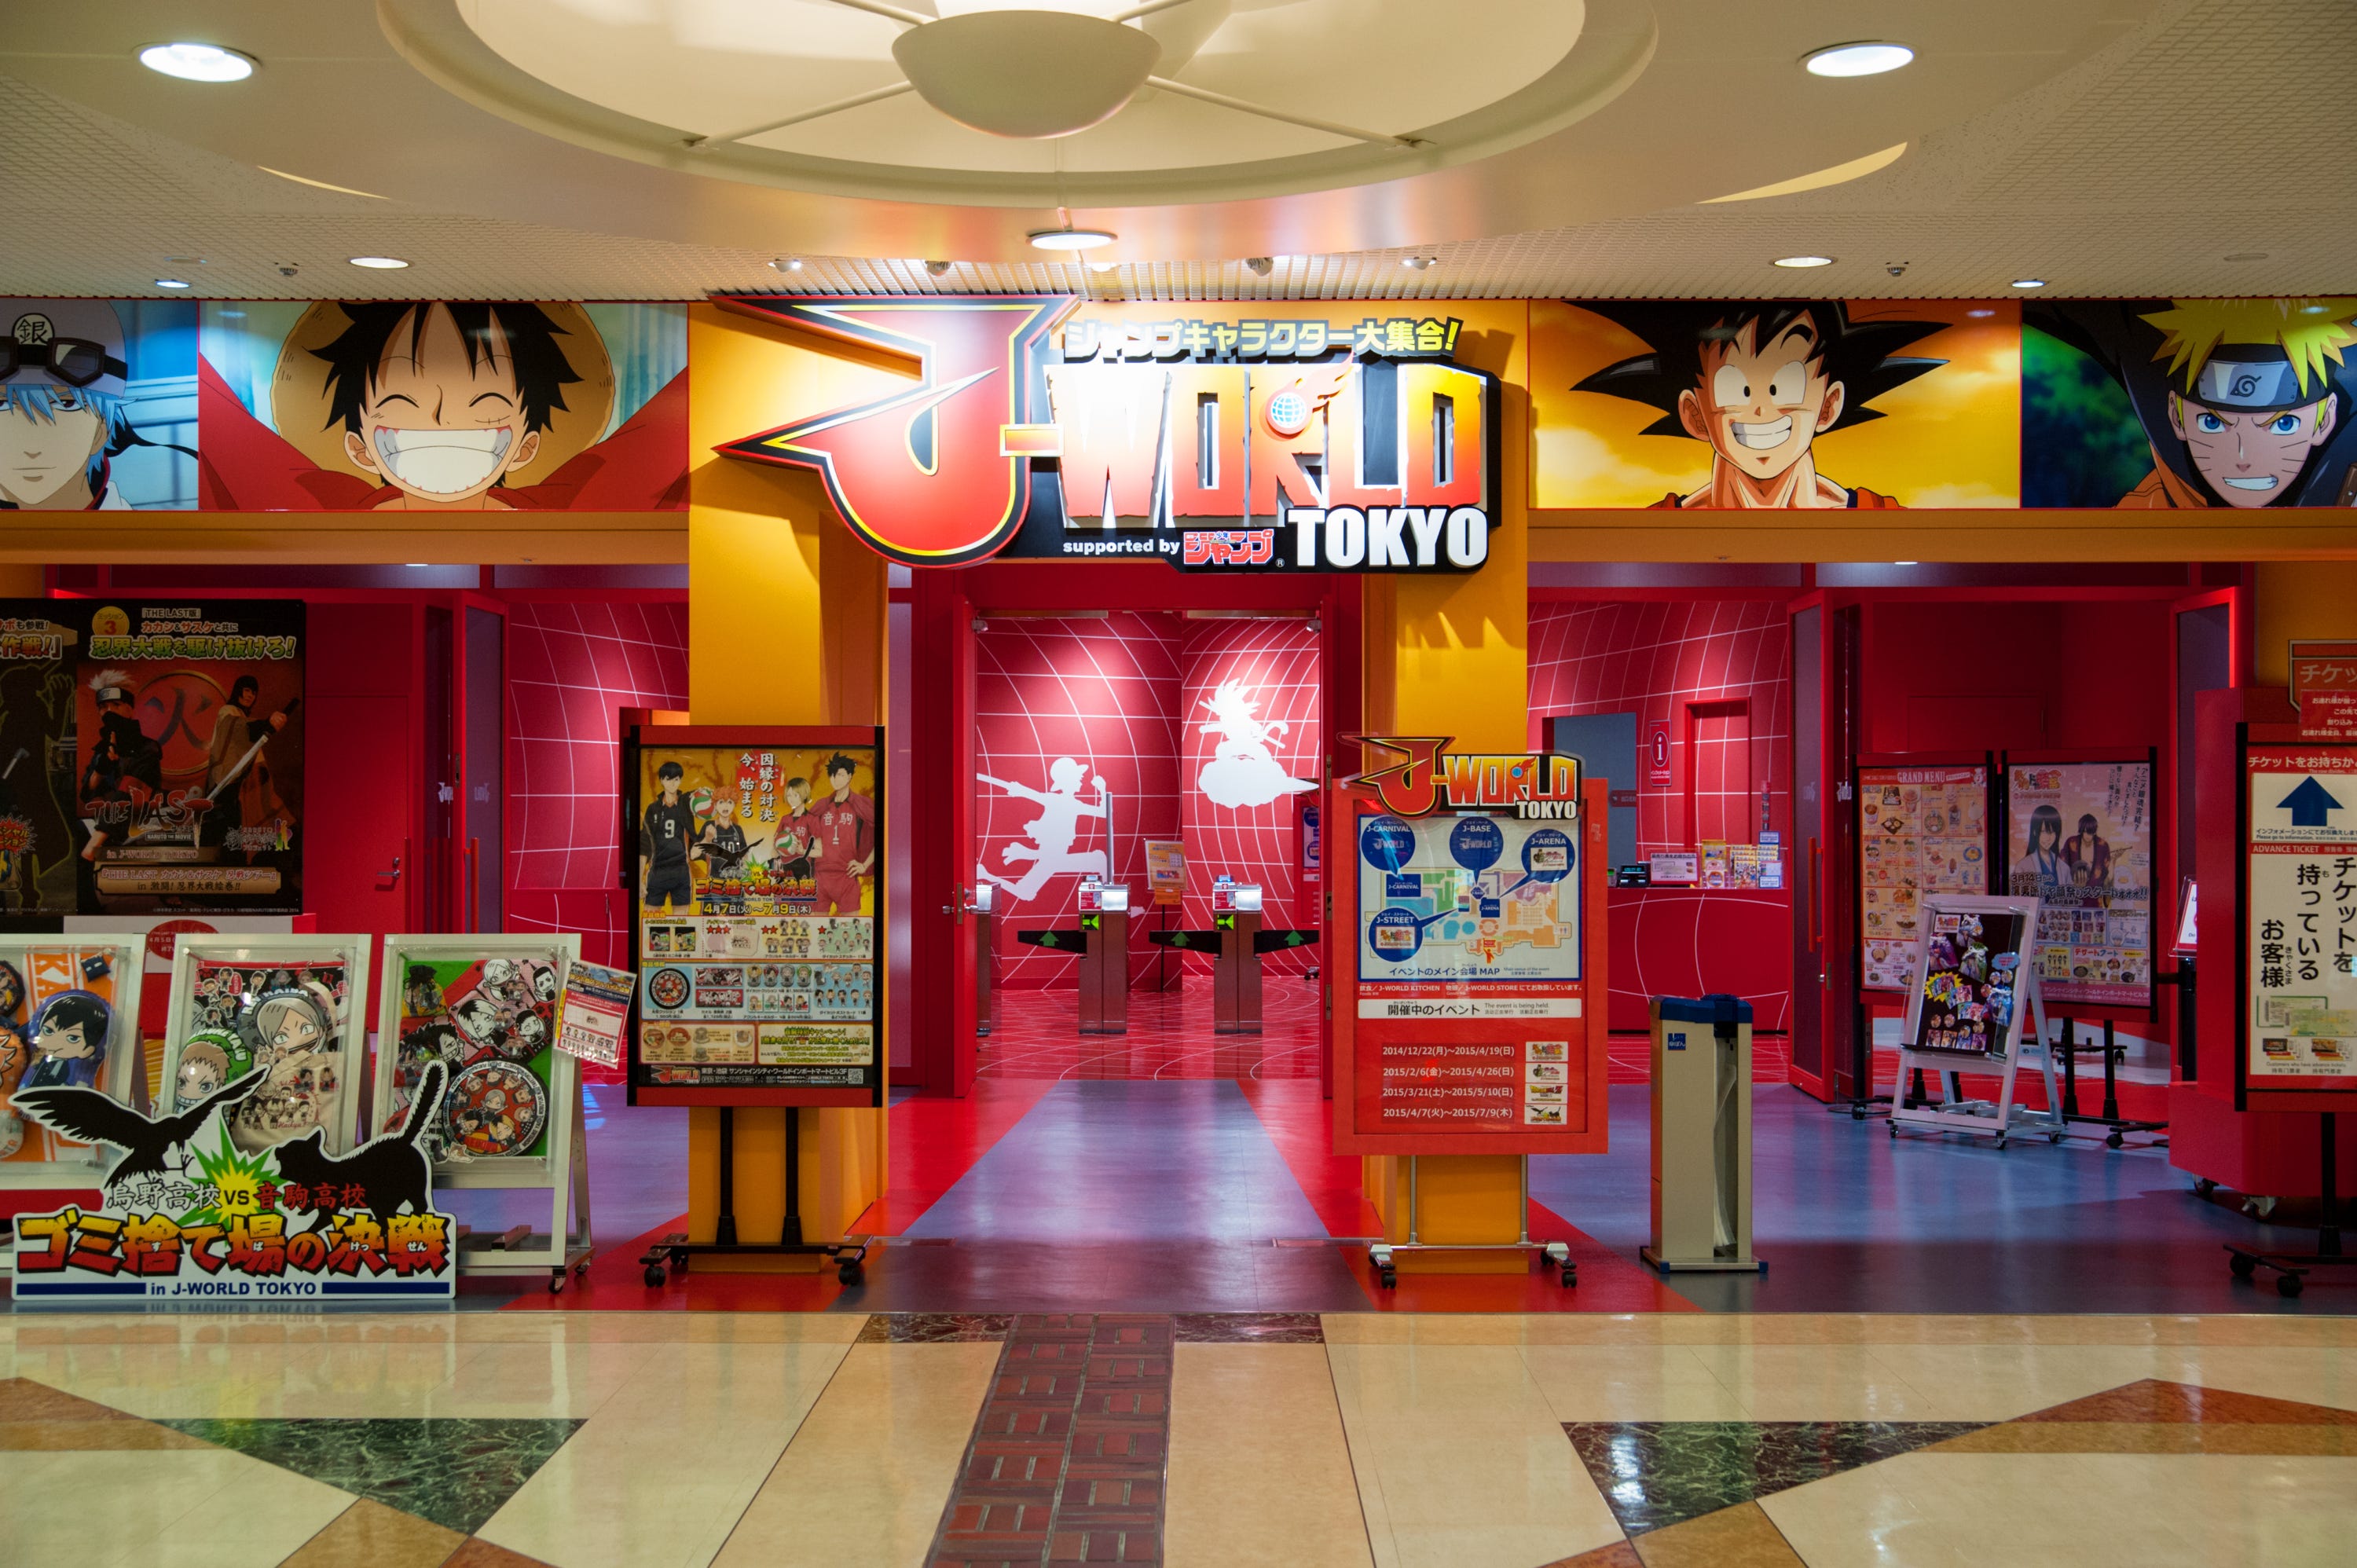 J World Tokyo A Gathering Of Characters From The Popular Japanese Anime By Ignition Staff Ignition Int Medium